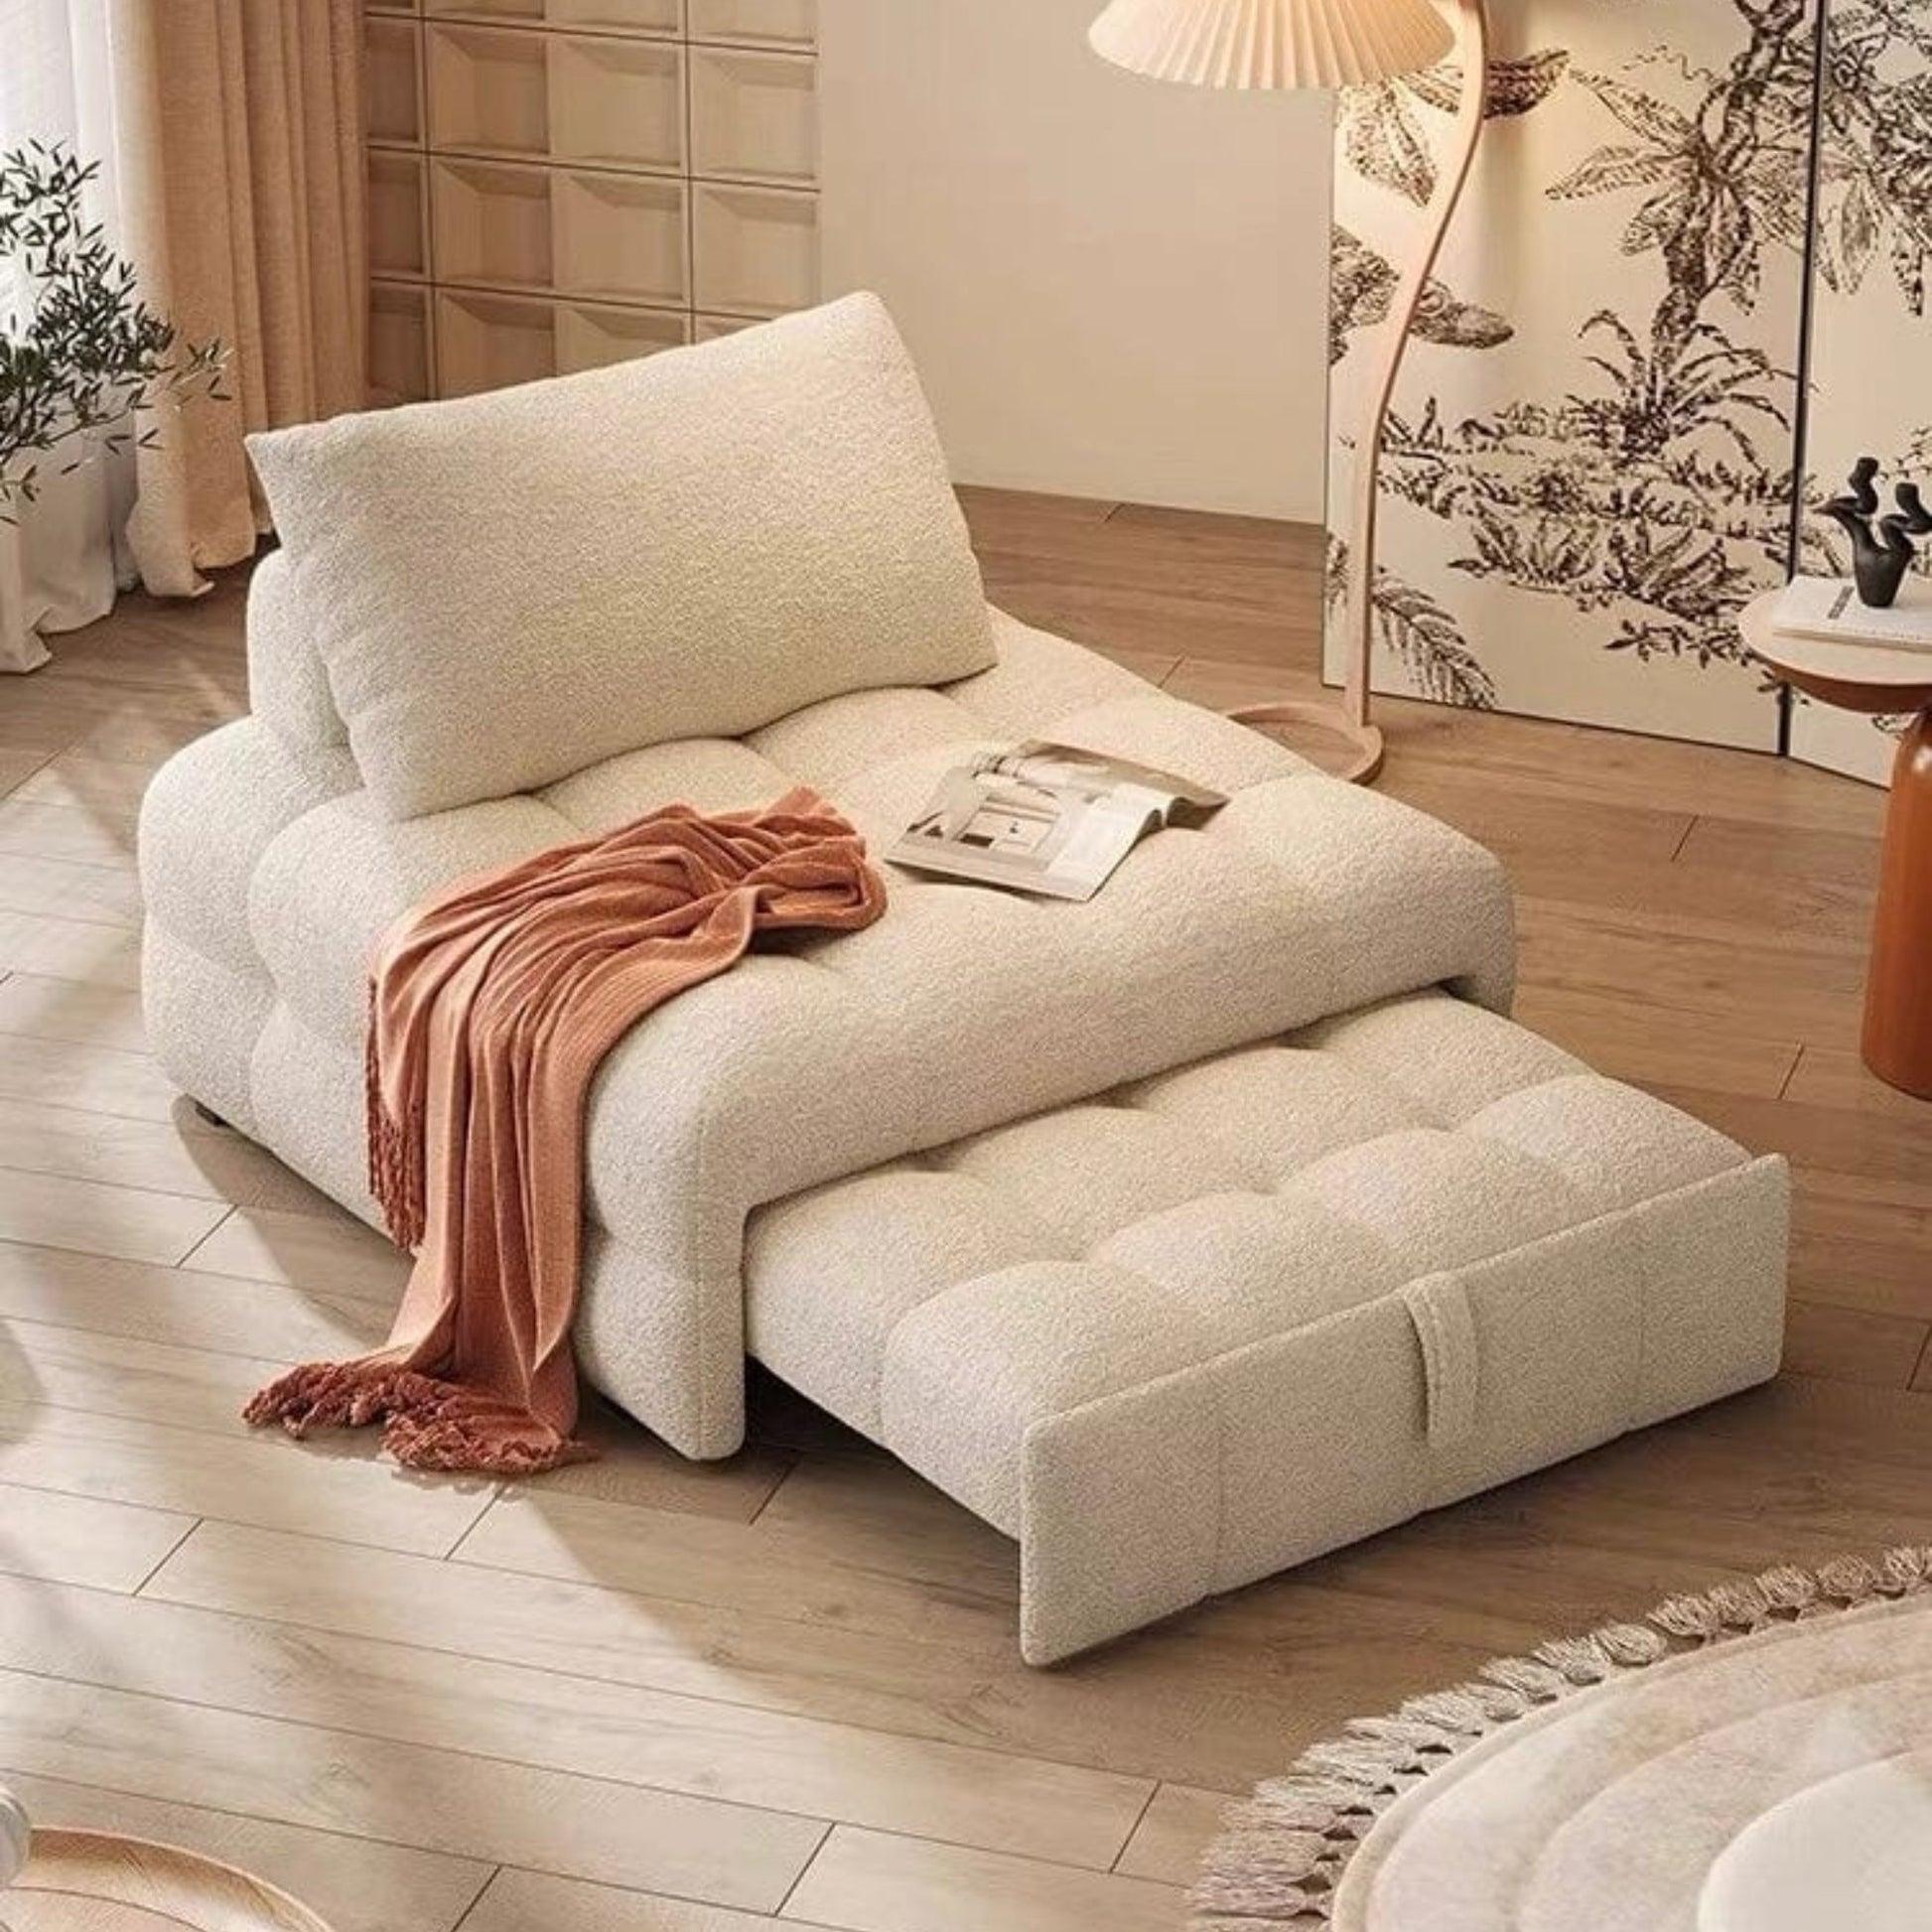 Candy Fabric Sofa Bed Comfy And